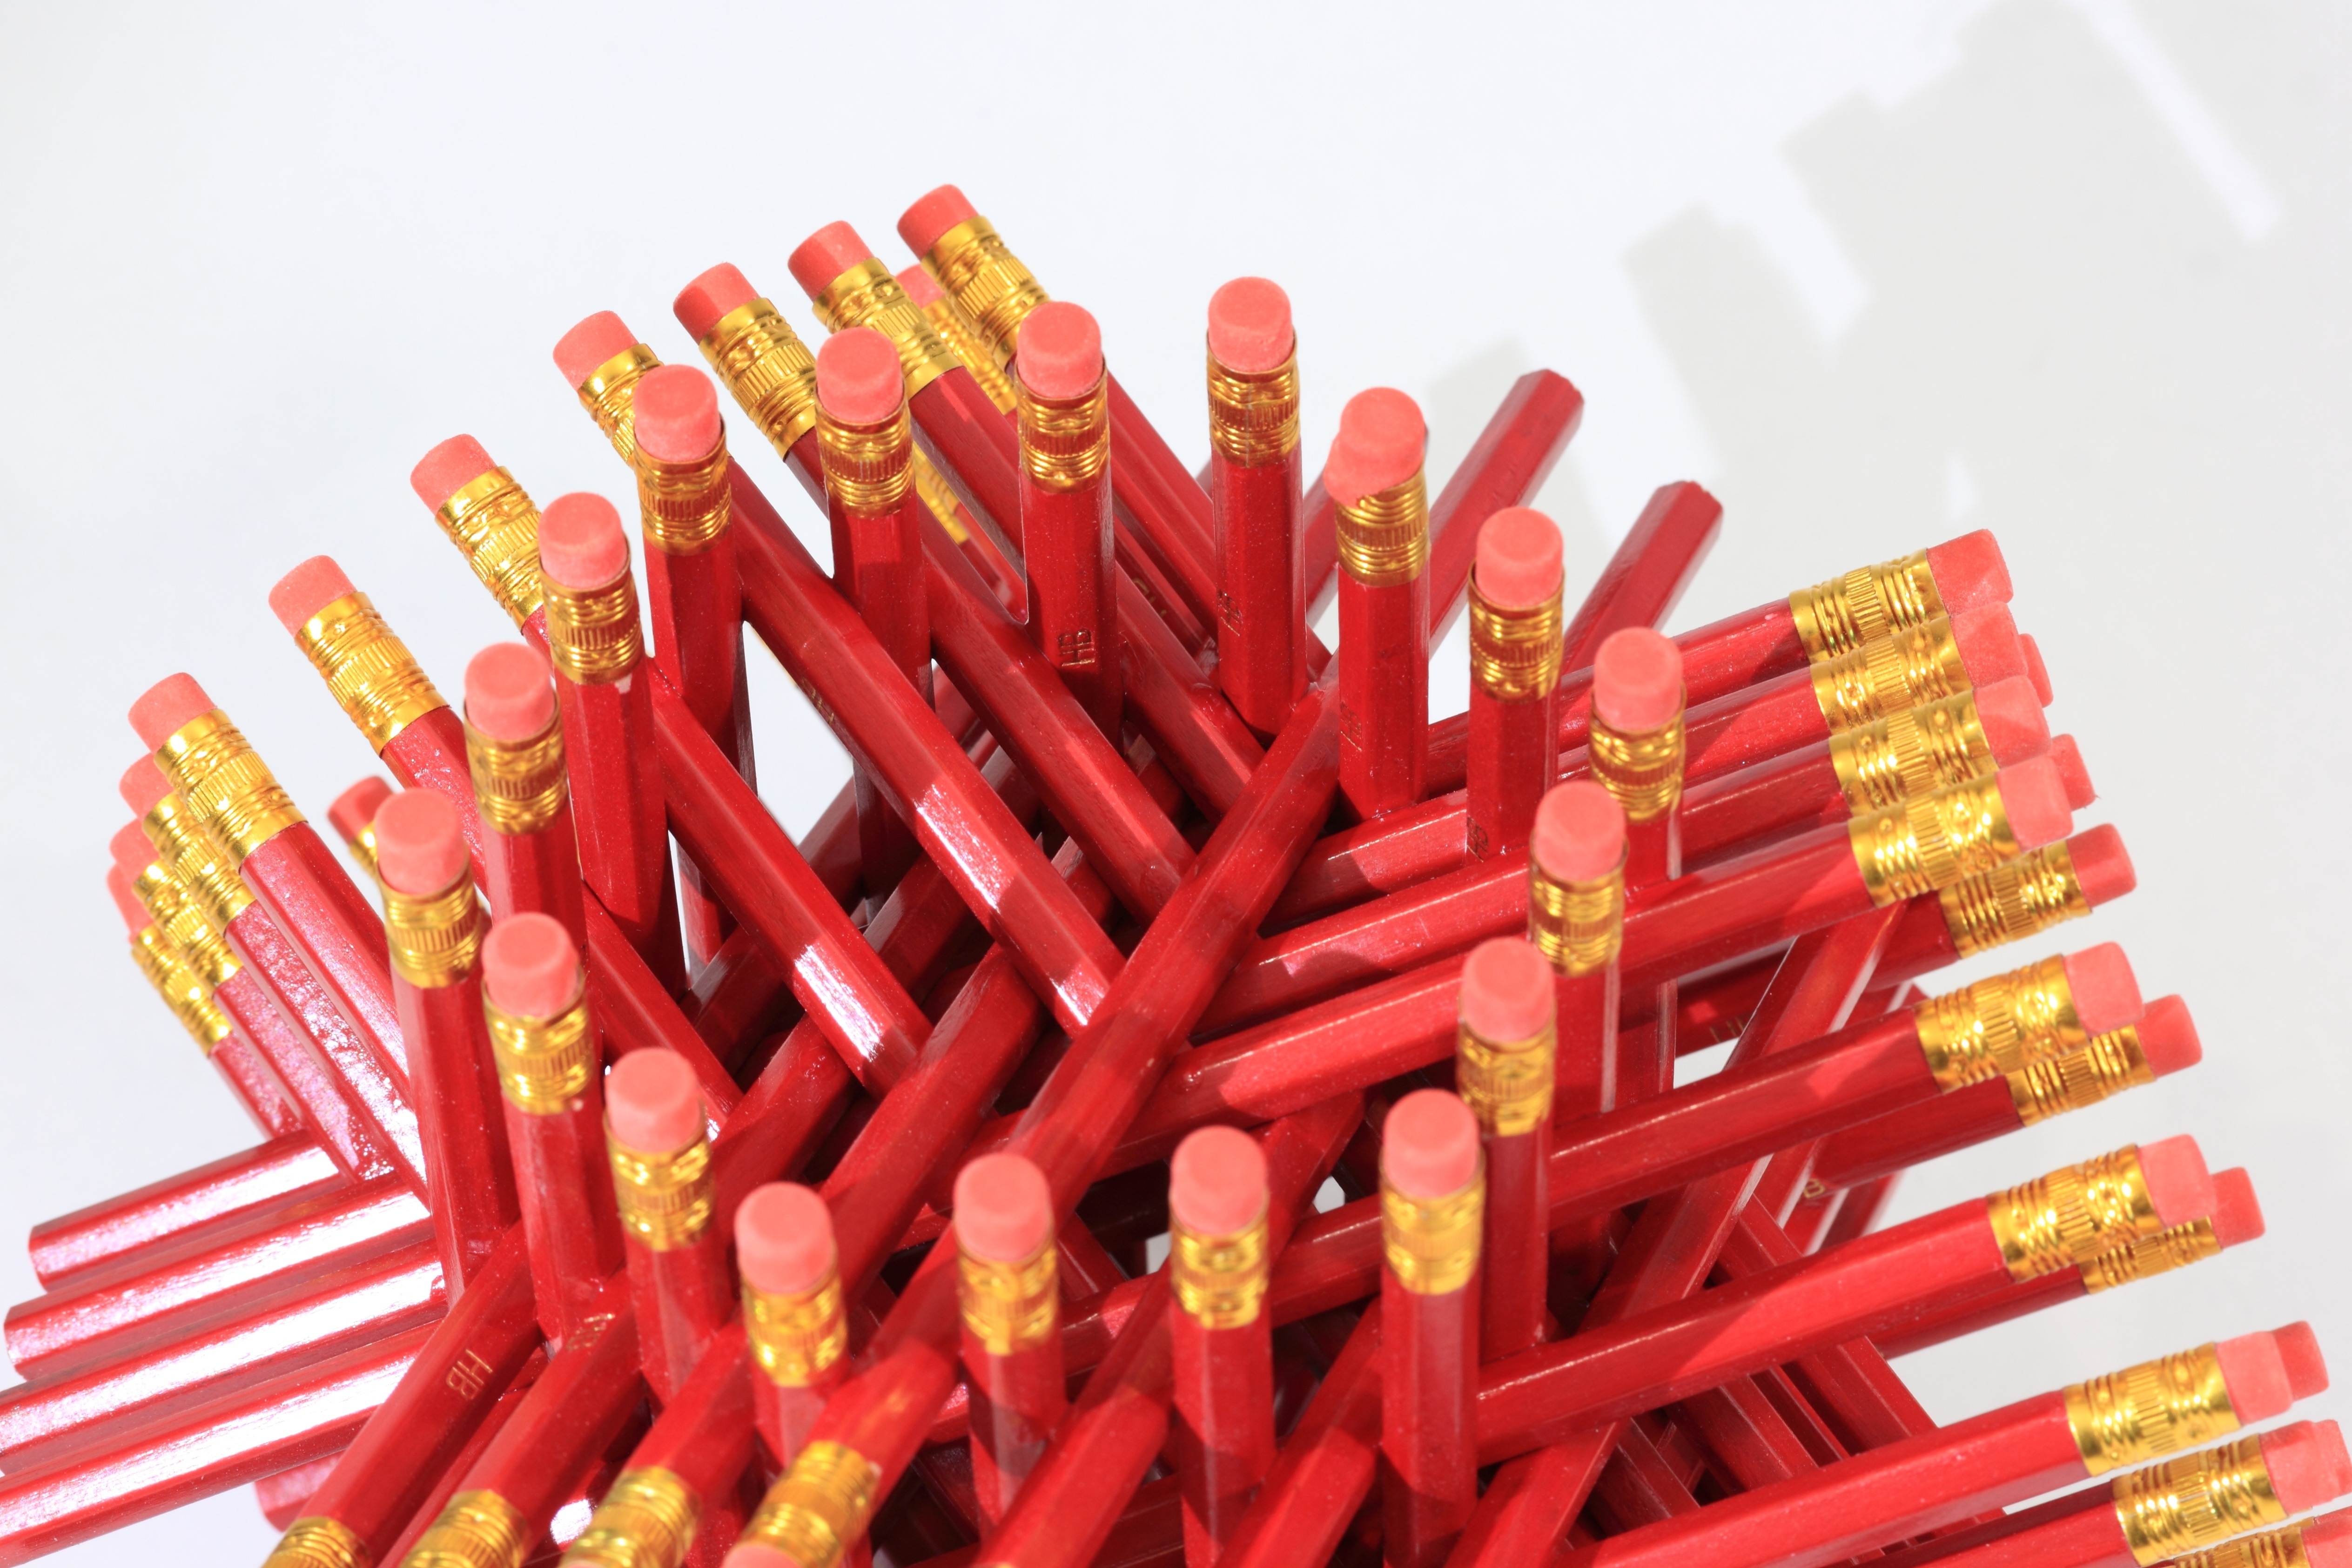 pile of red pencils